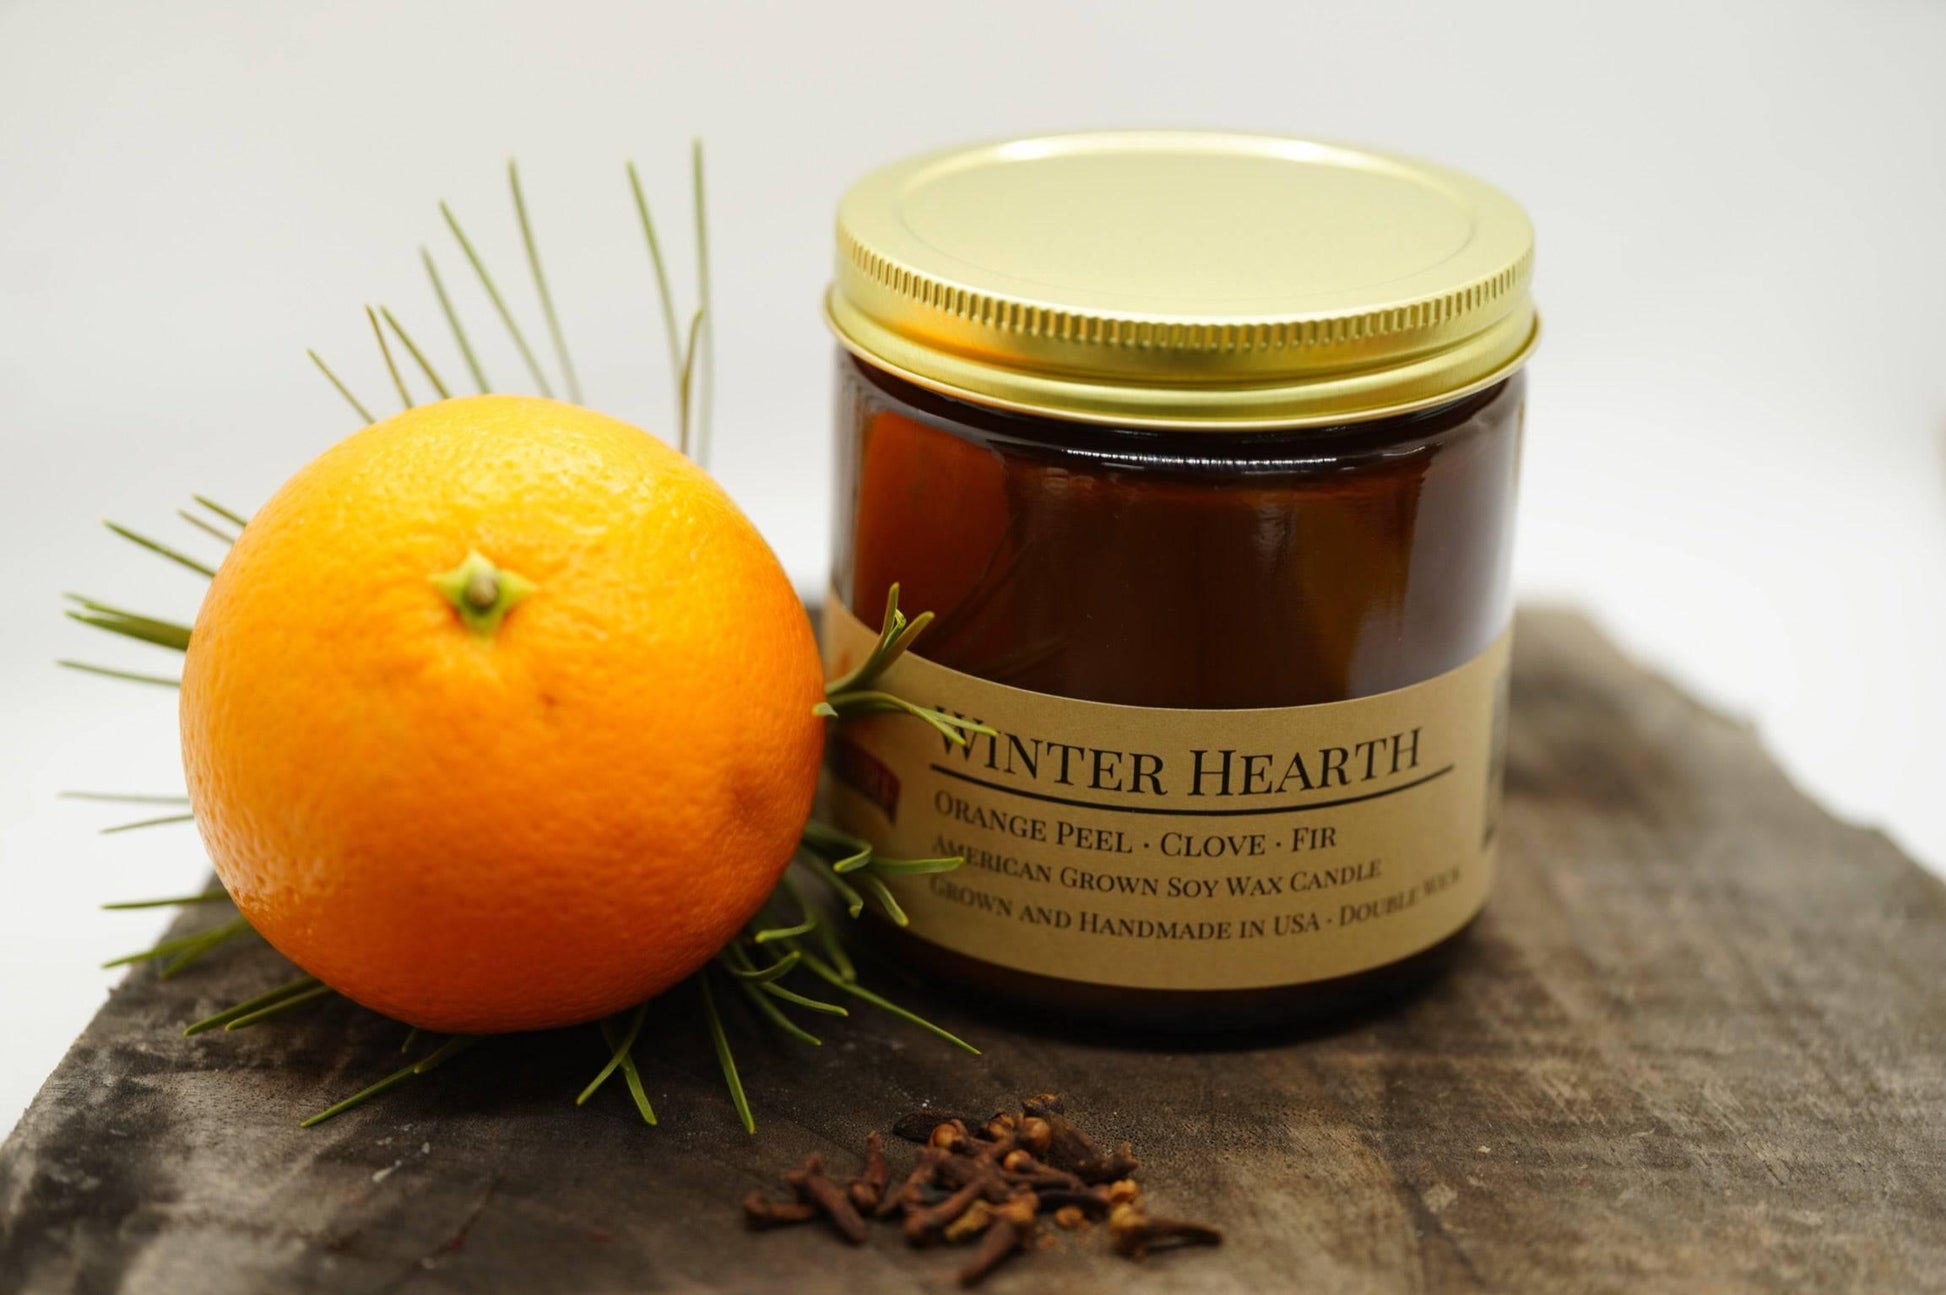 Winter Hearth Soy Wax Candle | 16 oz Double Wick Amber Apothecary Jar - Prairie Fire Candles